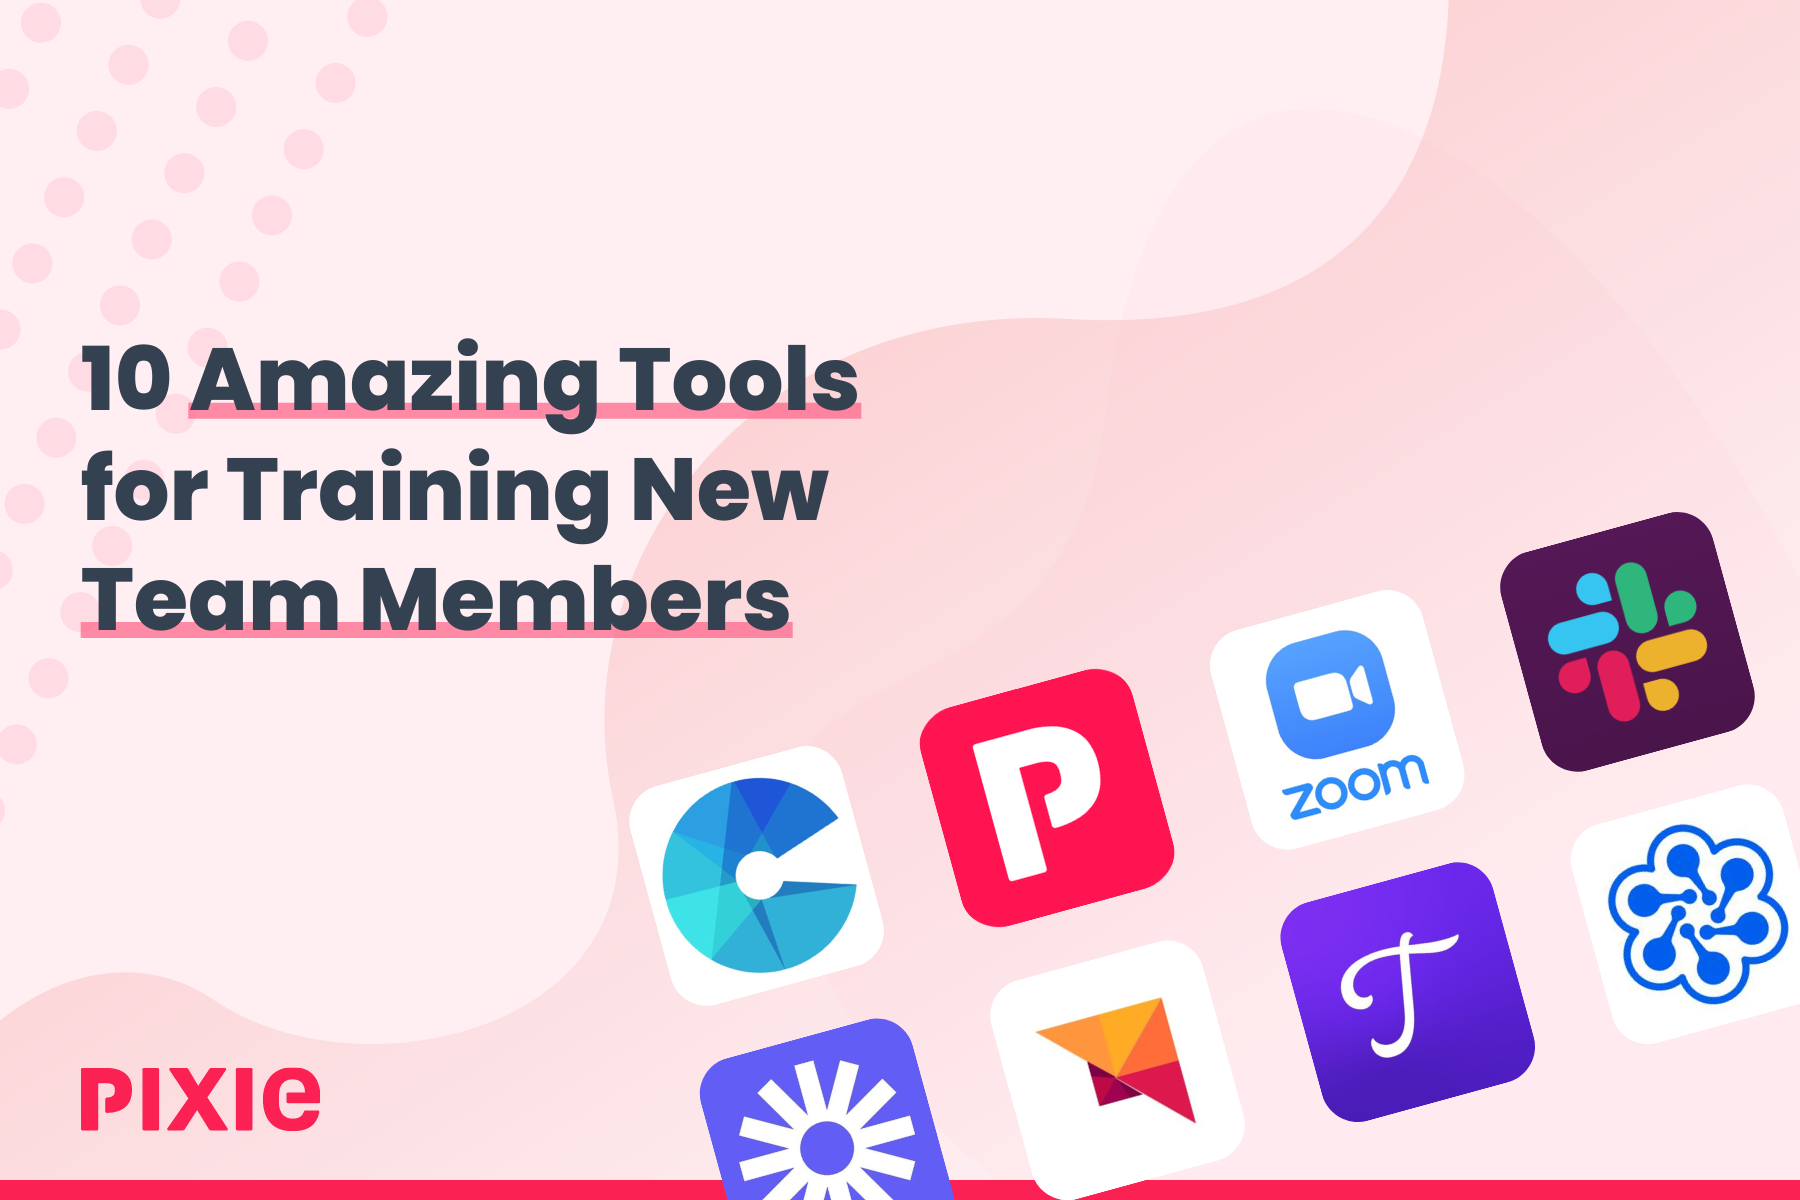 10 Amazing Tools for Training New Team Members